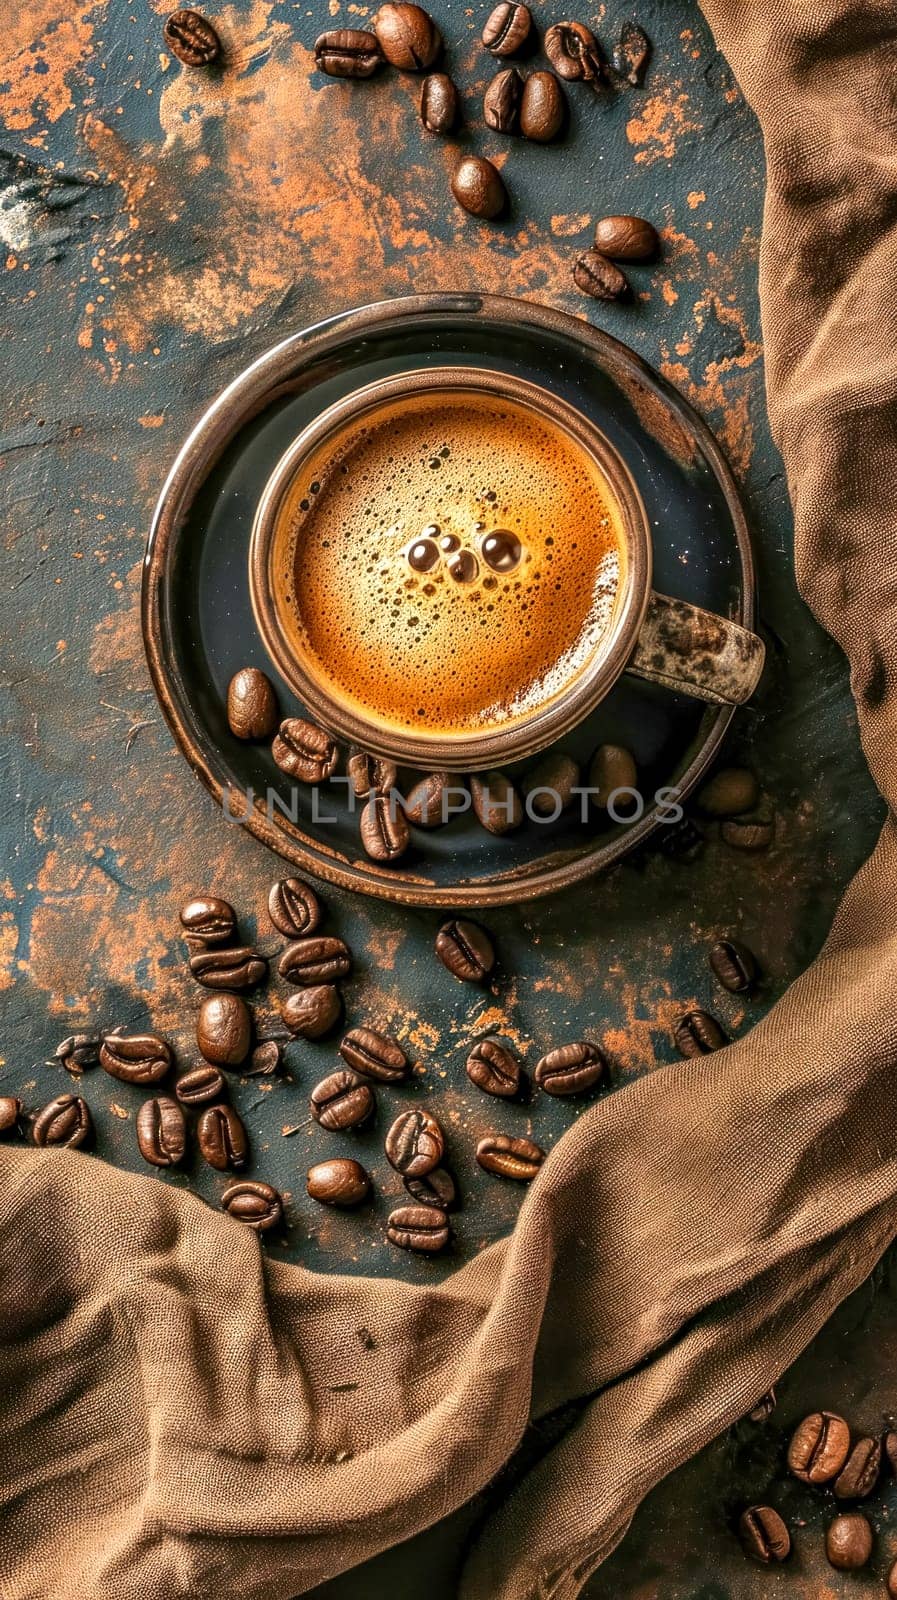 freshly brewed cup of coffee in a rustic setting, with whole beans scattered around on a weathered surface, accompanied by a textured cloth, invoking a sense of warmth and aromatic richness by Edophoto